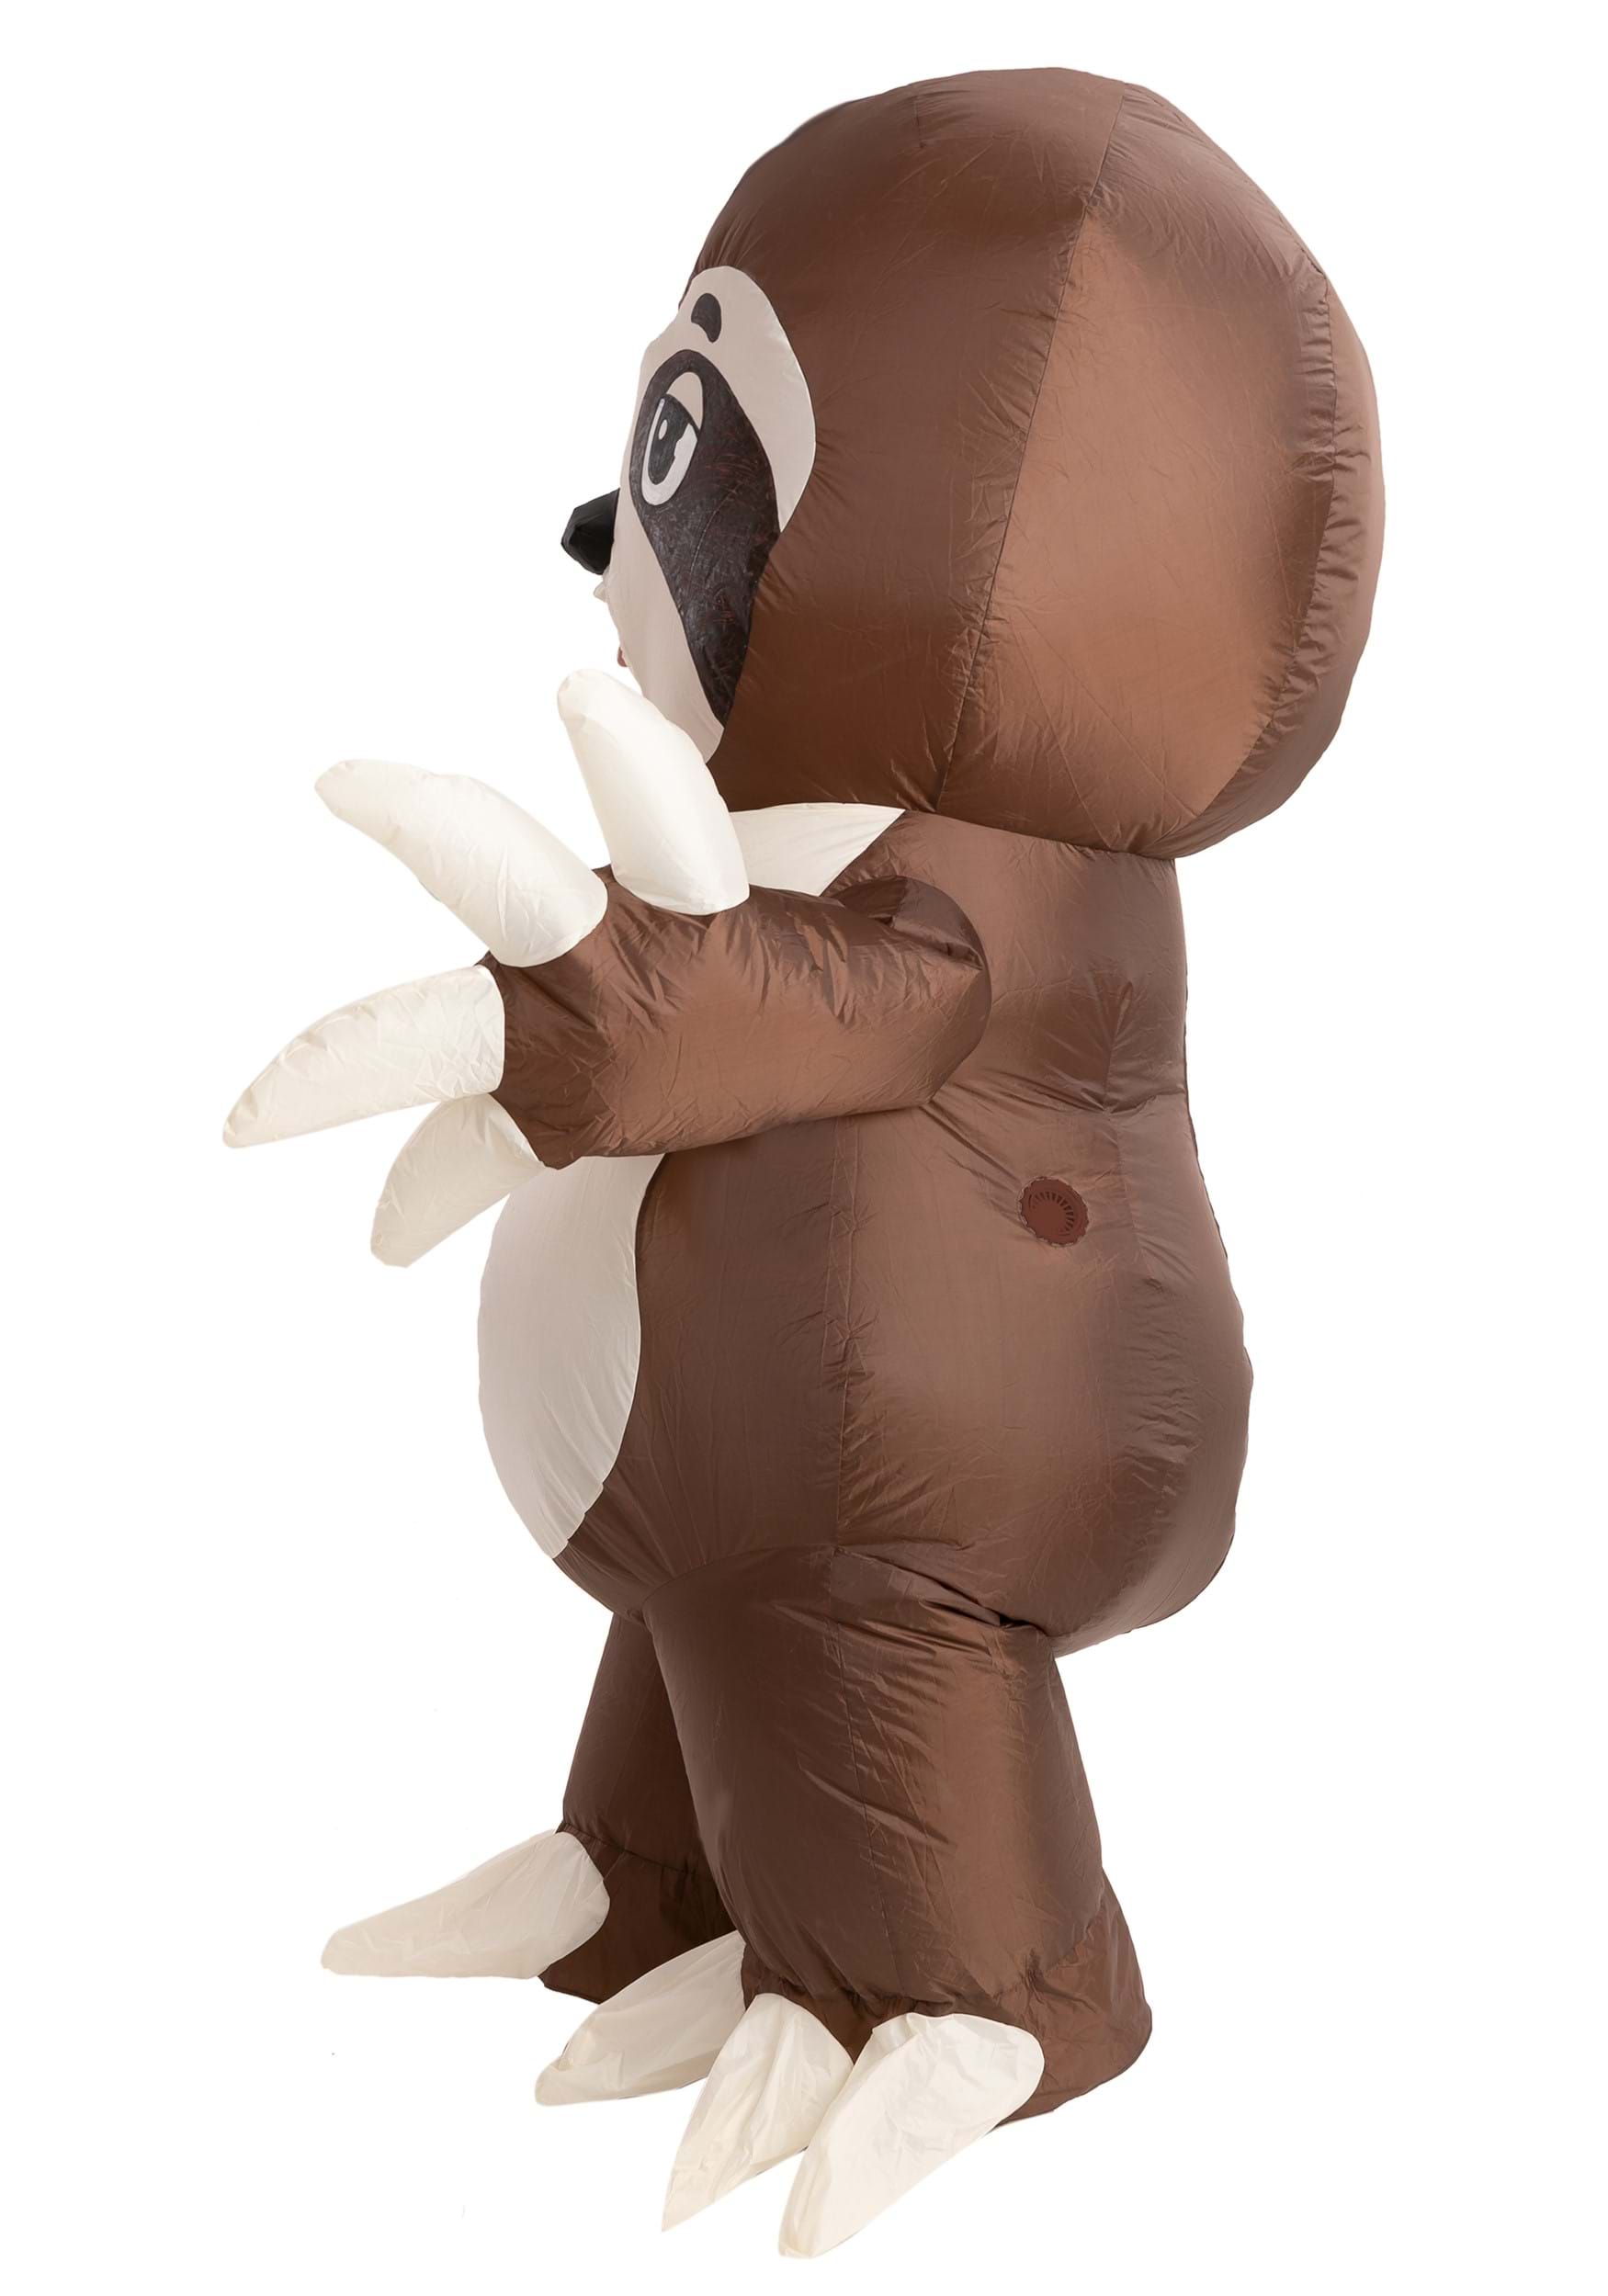 Inflatable Sloth Costume For Adults